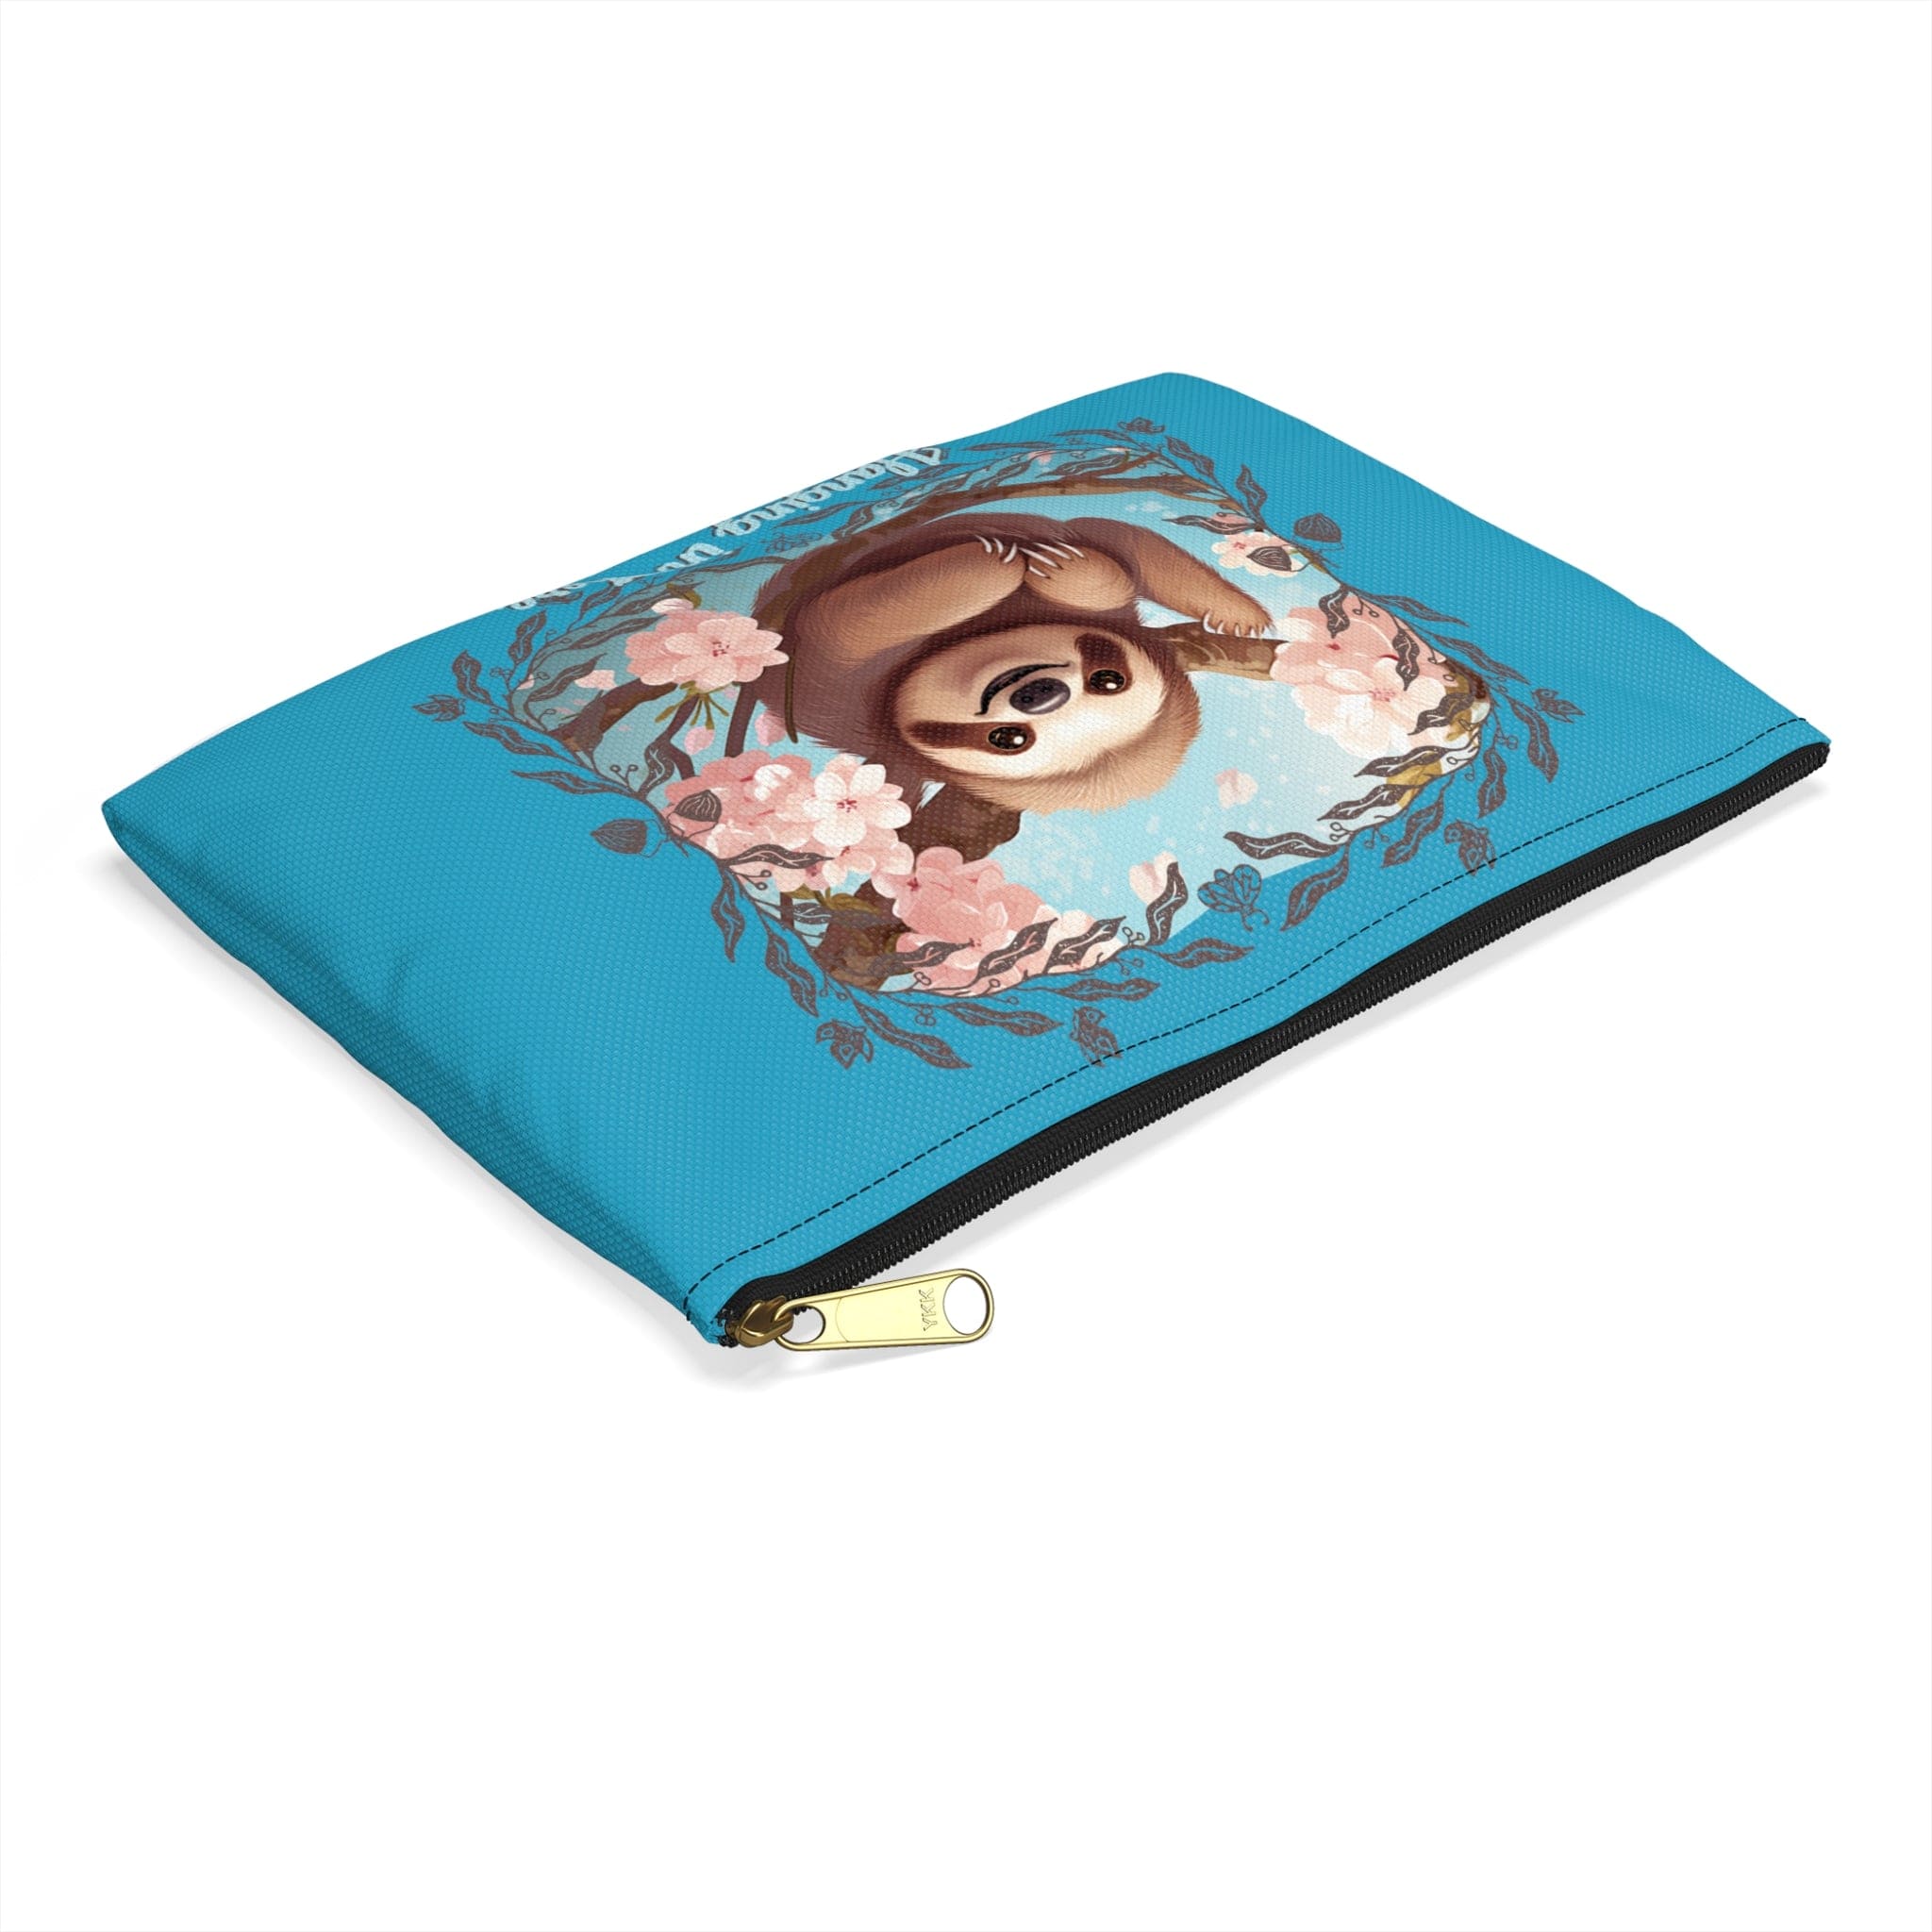 Printify Bags Sloth Hanging in There - Accessory Pouch Turquoise